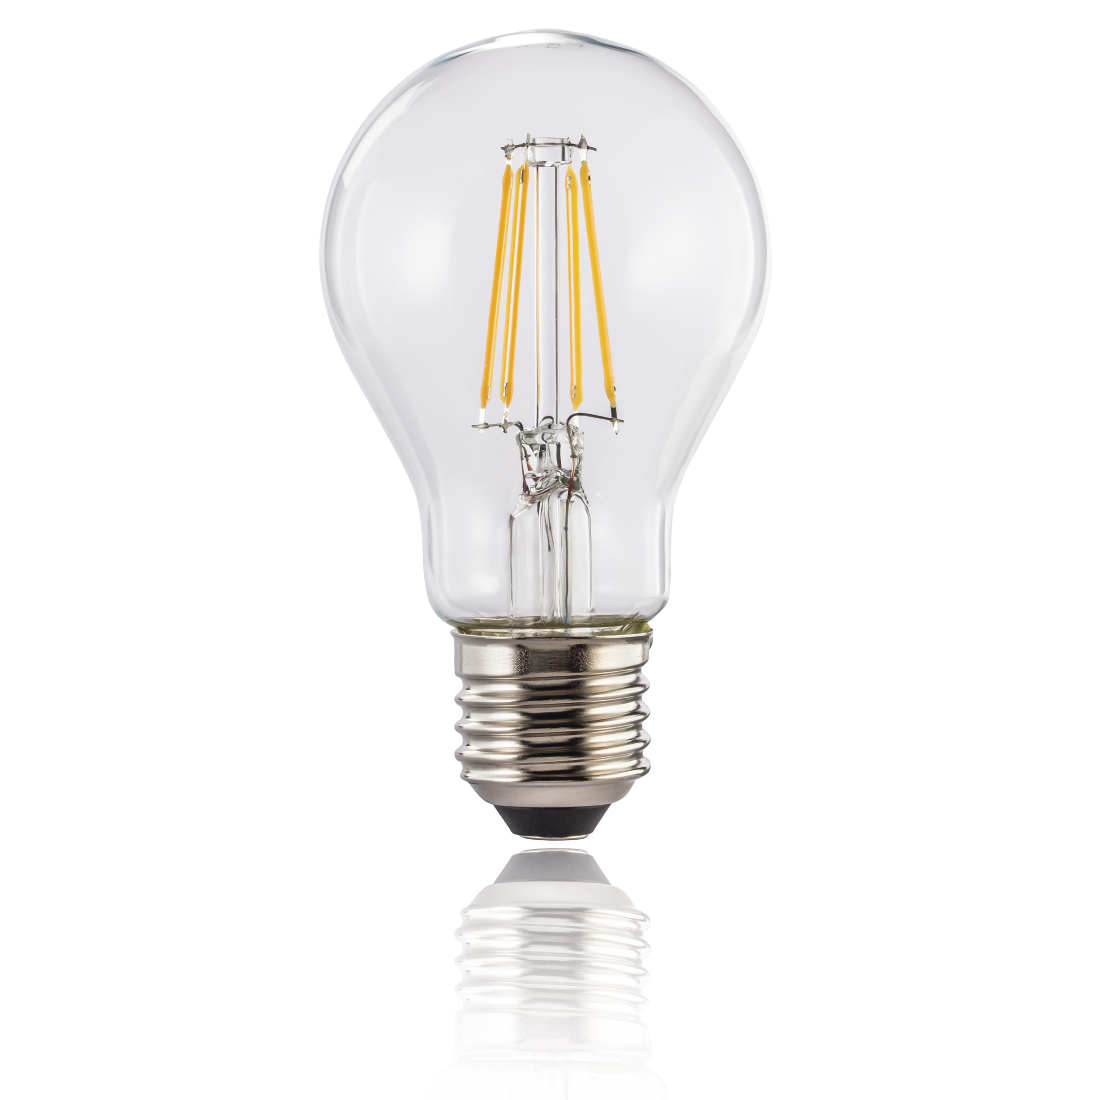 abx2 High-Res Image 2 - Xavax, LED Filament, E27, 1055 lm Replaces 75W, Incandescent Bulb, warm white